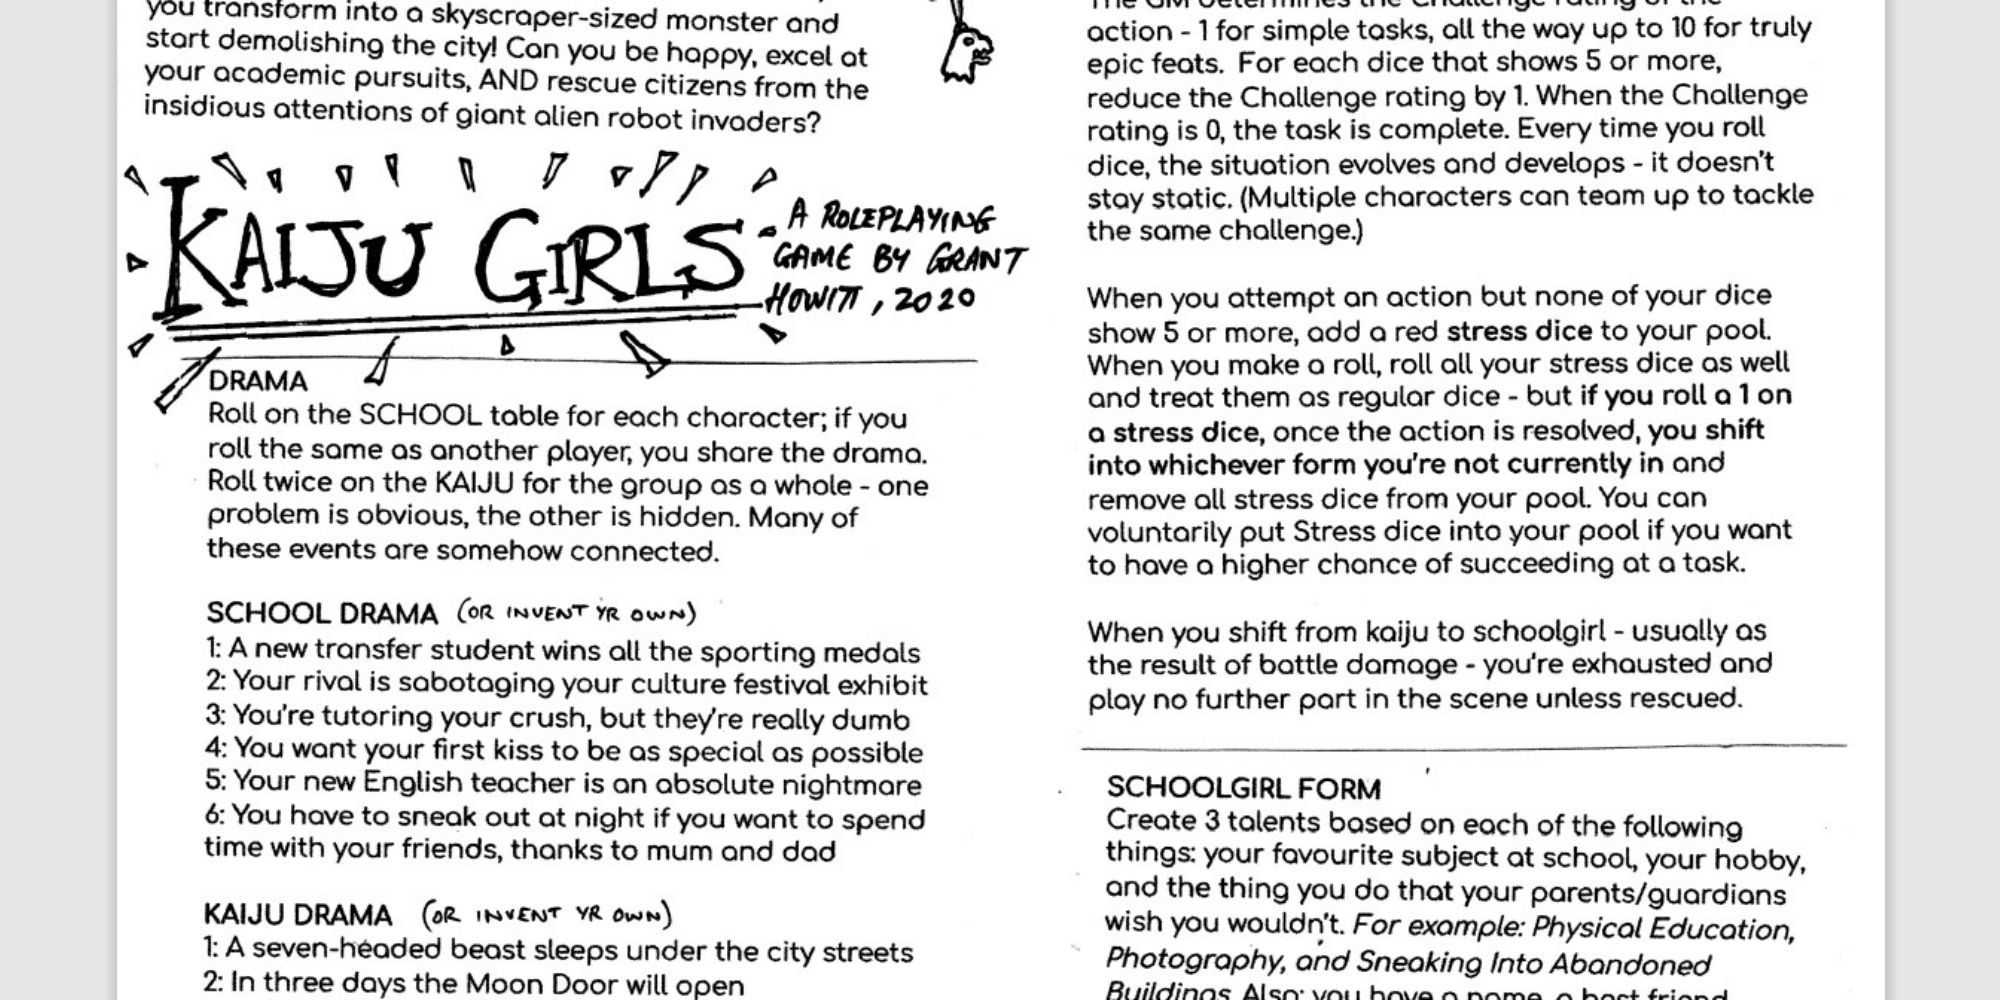 Kaiju Girls one-page RPG detailing the girls' drama and kaiju and schoolgirl forms